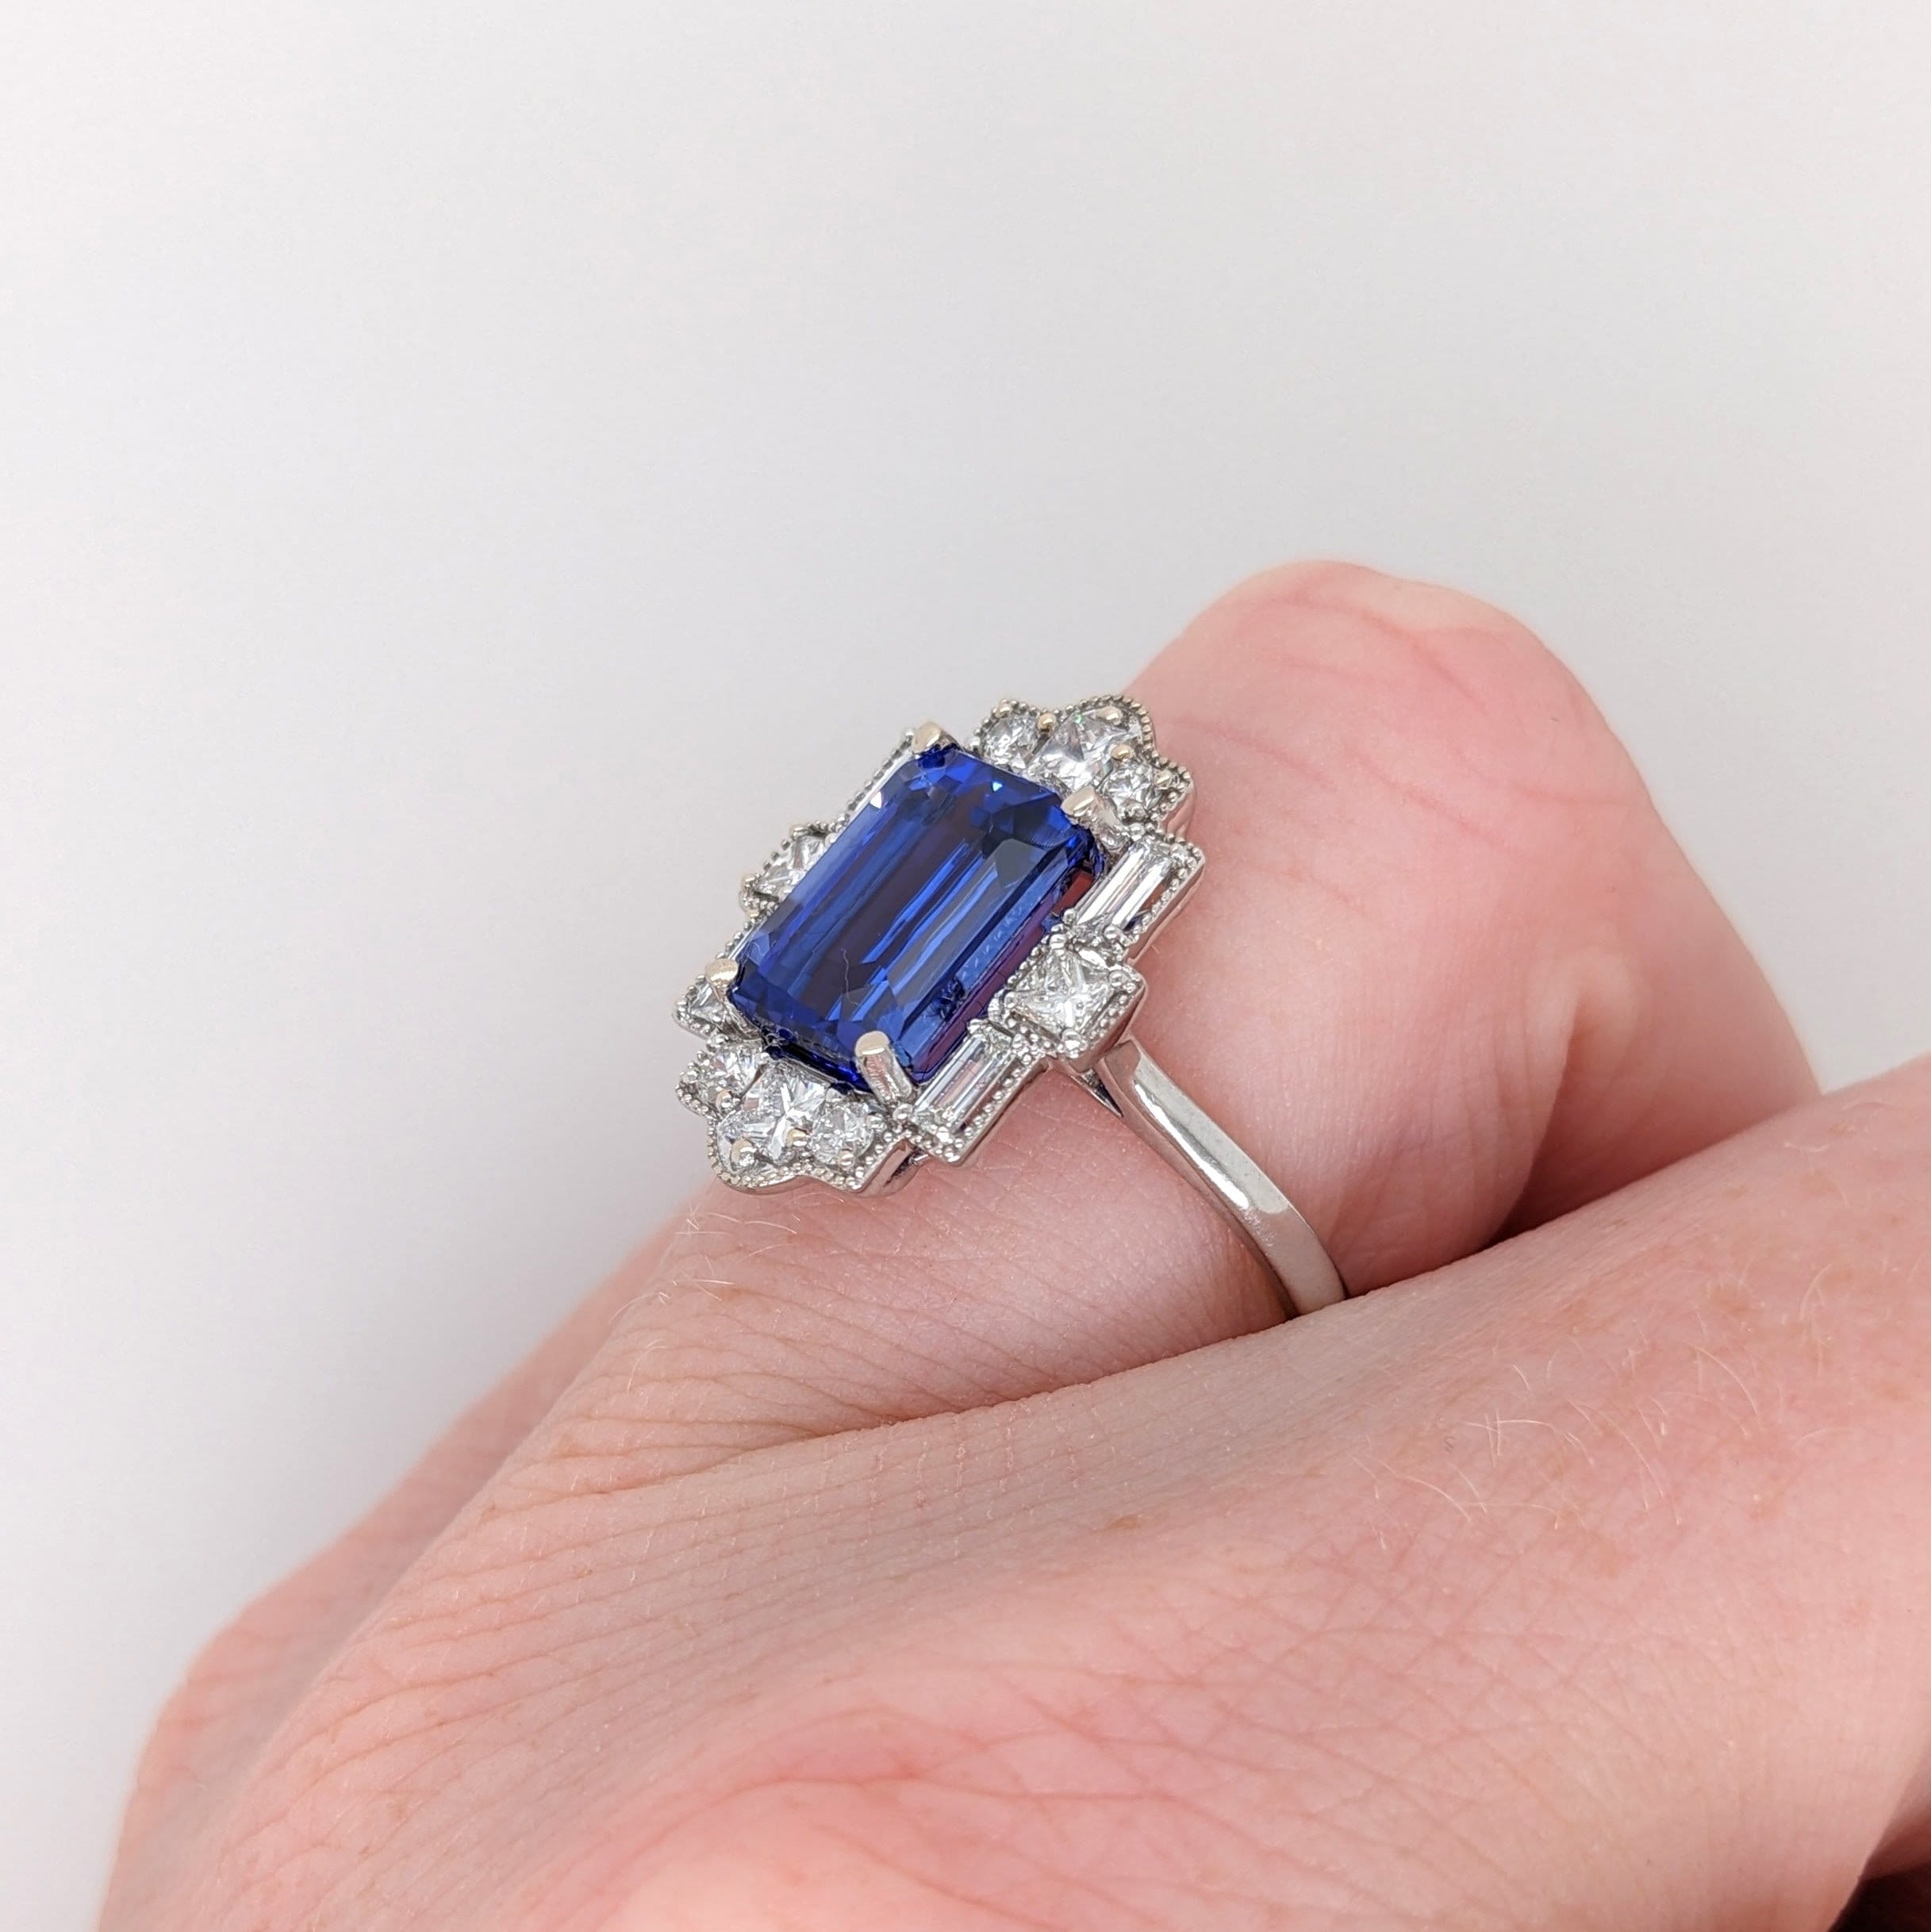 emerald cut tanzanite 9x7mm blue natural gemstone and diamond ring in 14k white gold with milgrain detail, art deco style with a straight shank and halo of 4 baguette diamond accents 4 princess diamond accents and 4 round diamond accents